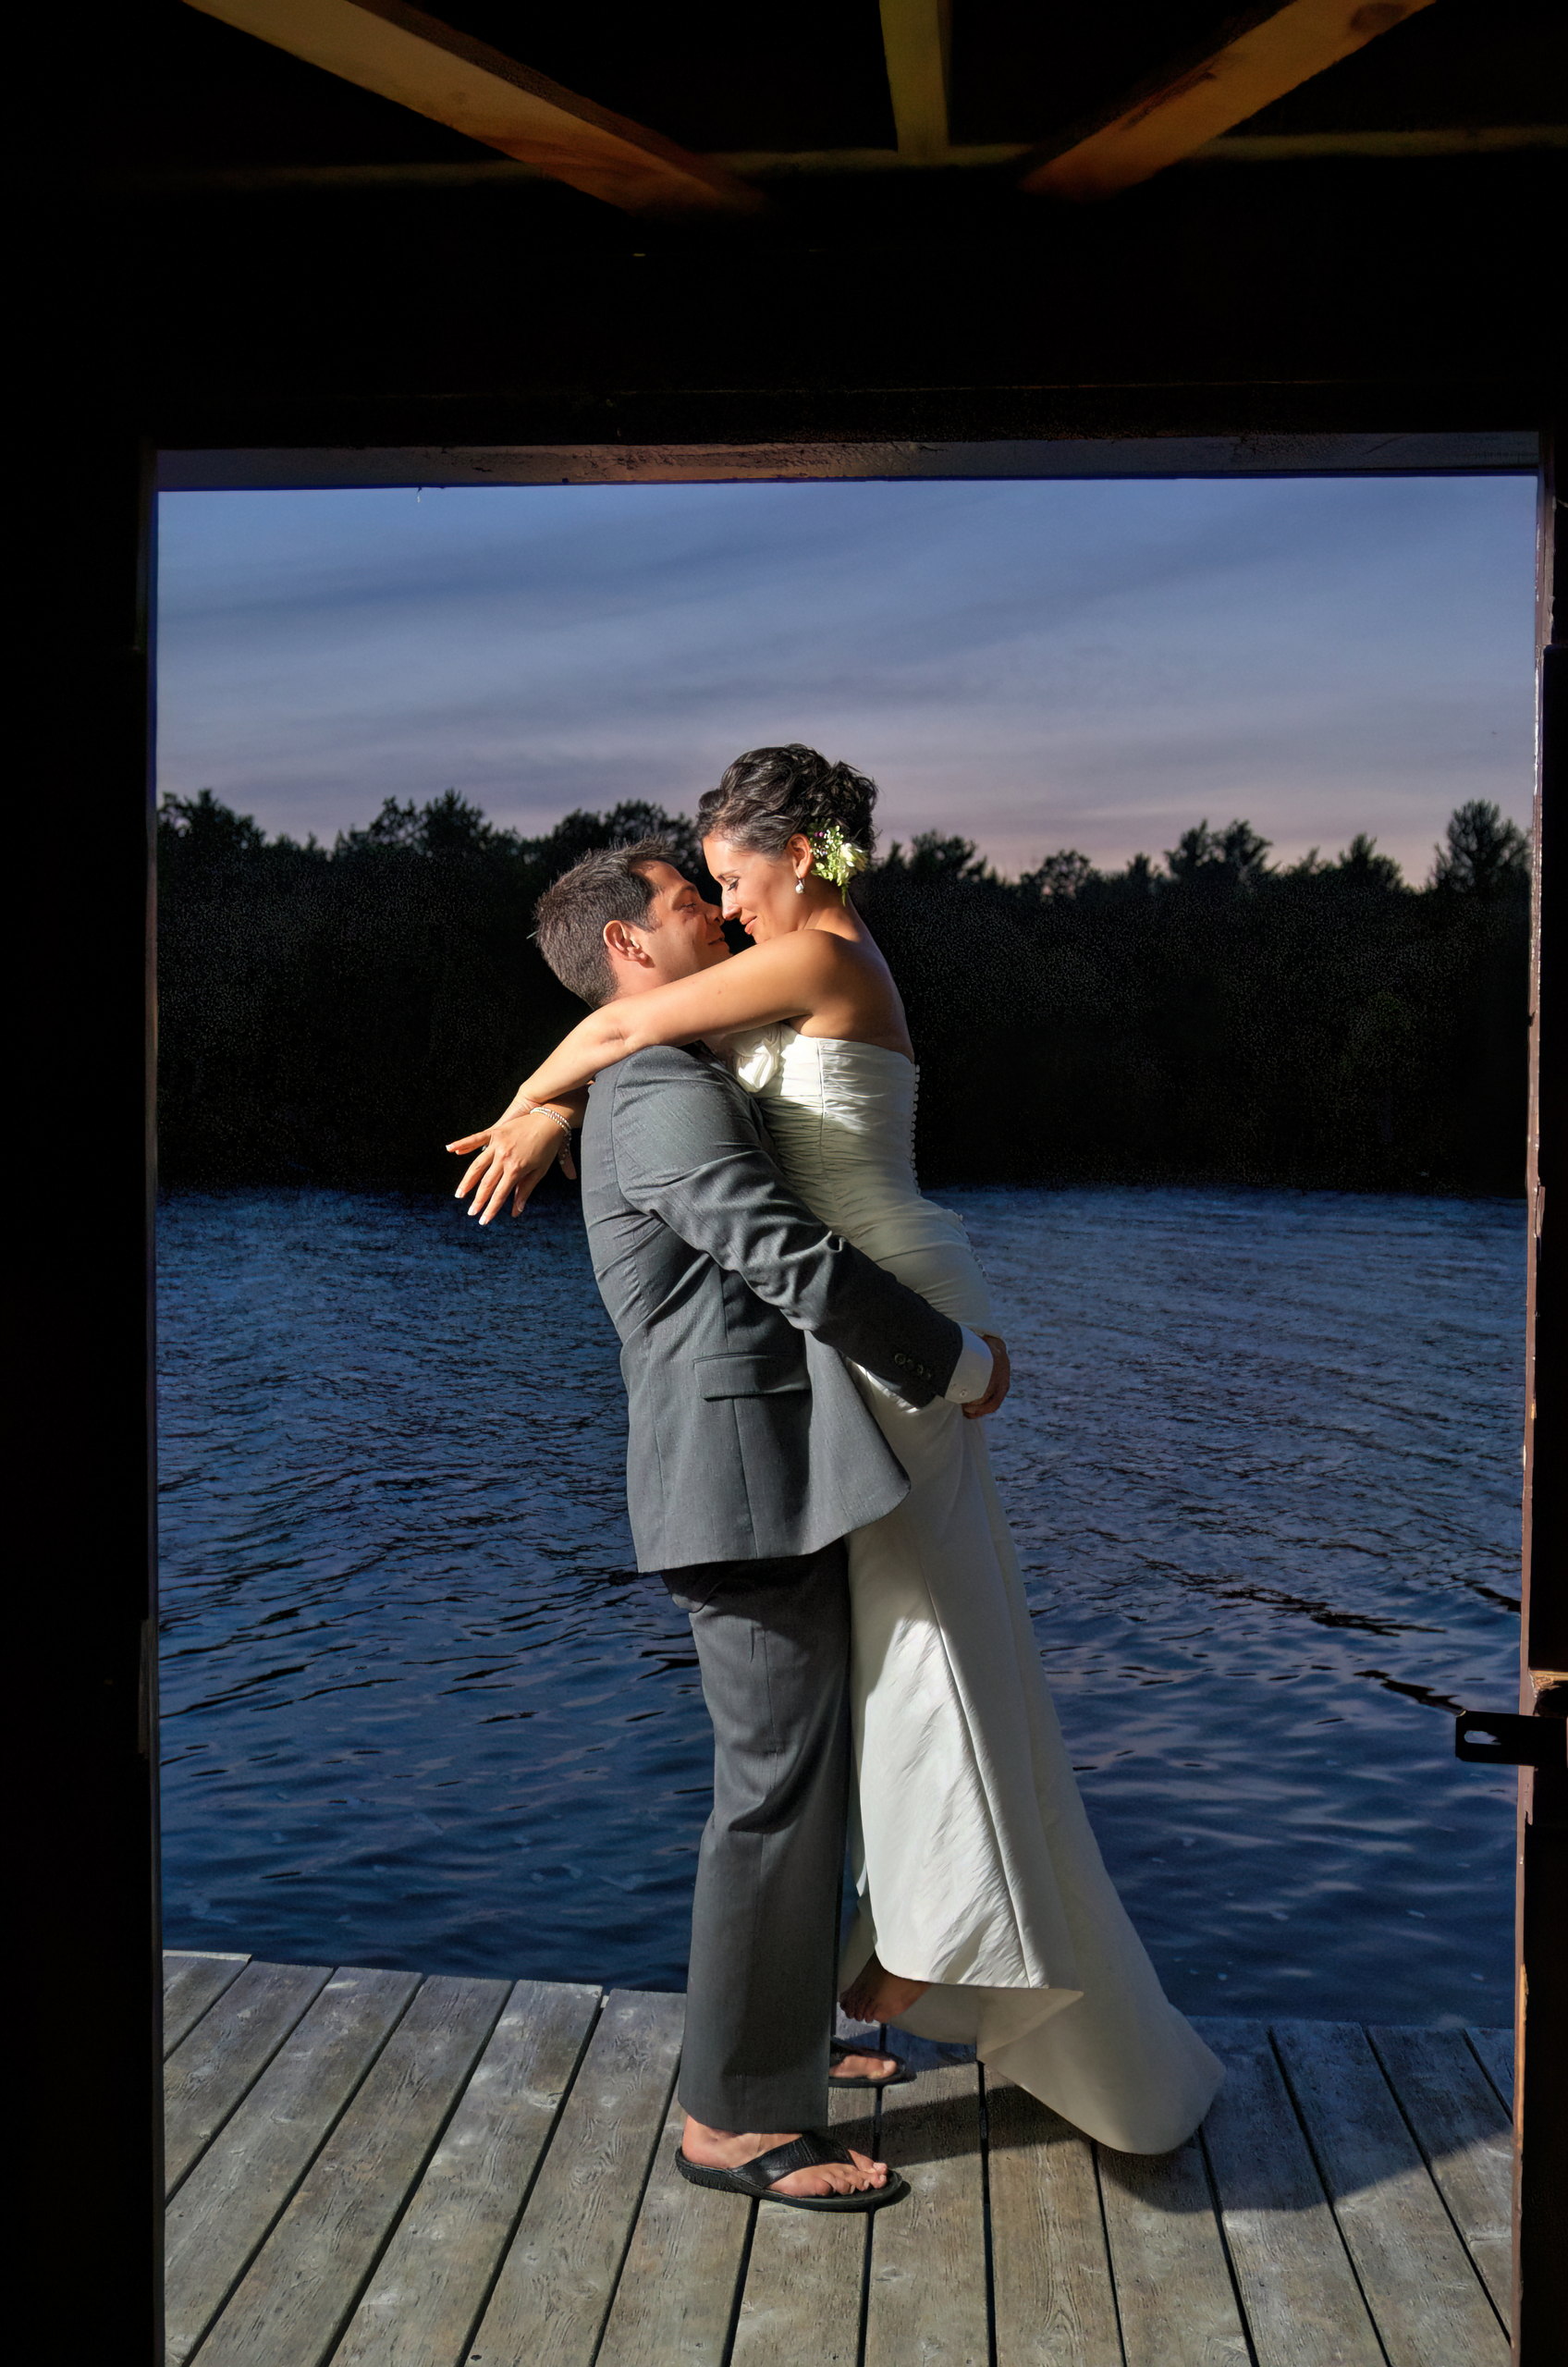 Bride and Groom share a moment alone on the boathouse dock